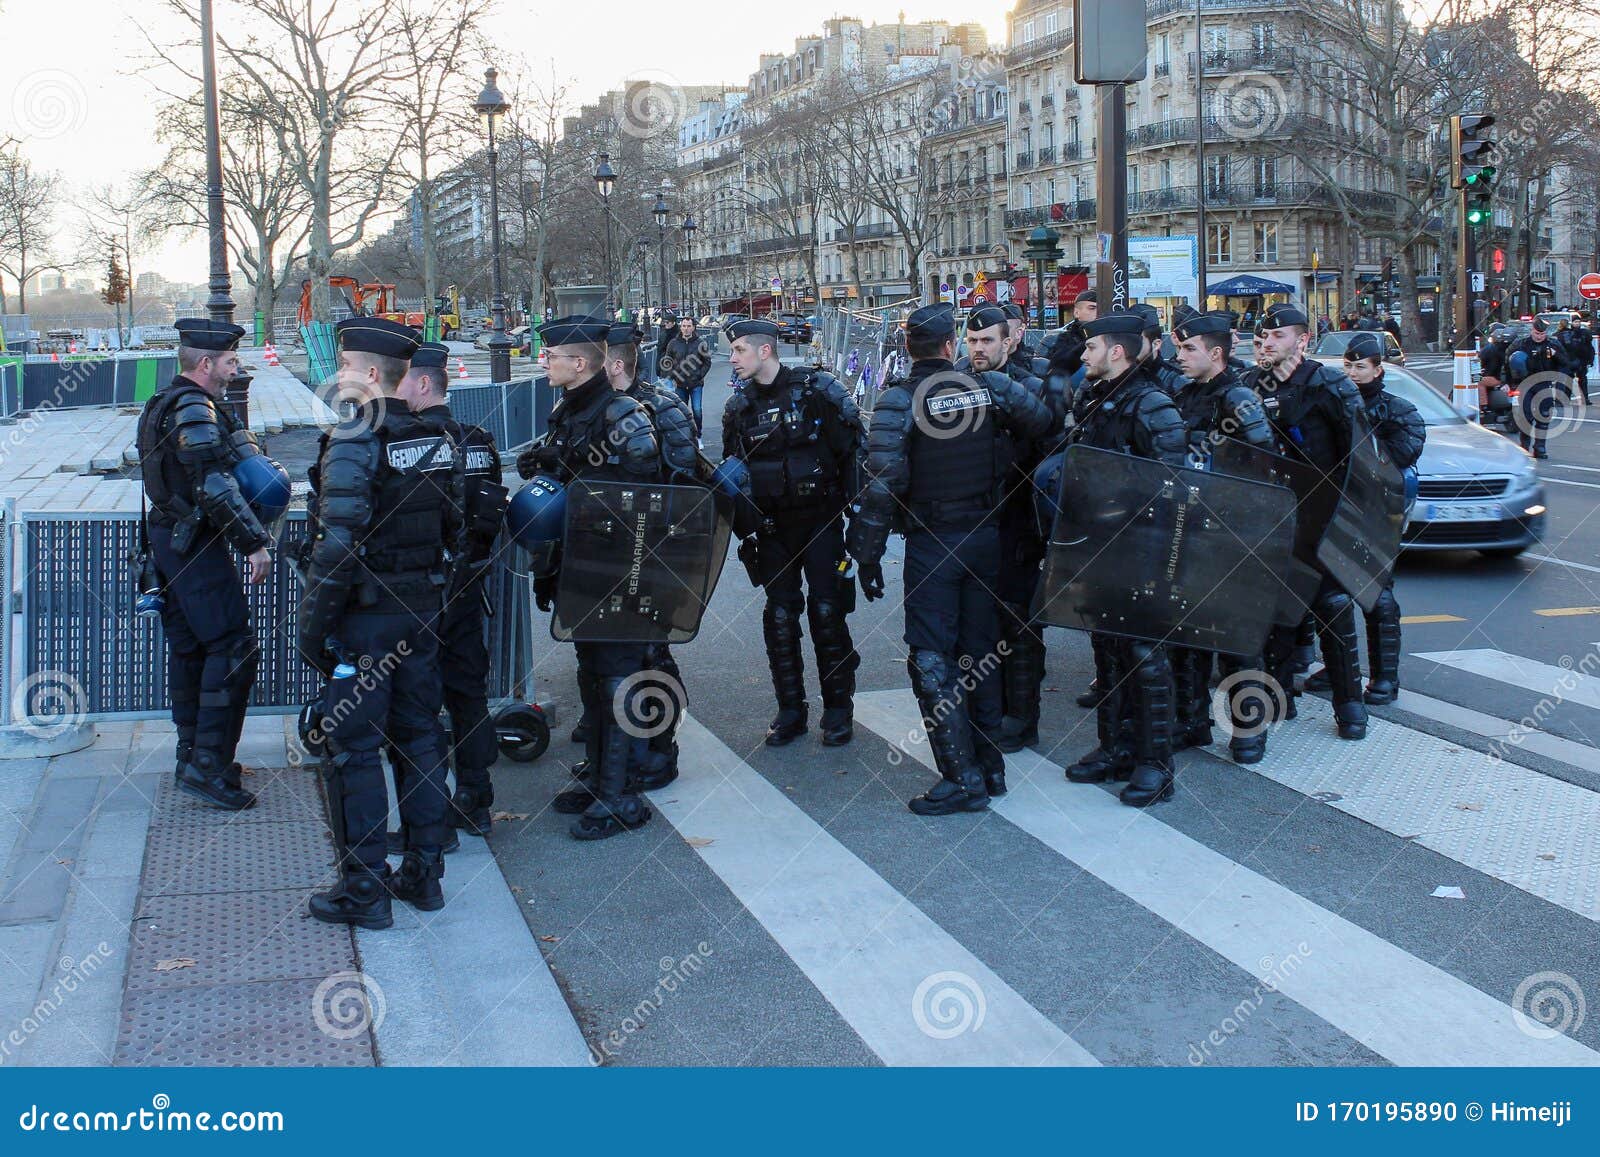 18 January 2020, Paris, France - French Riot Police Squad at the Yellow ...